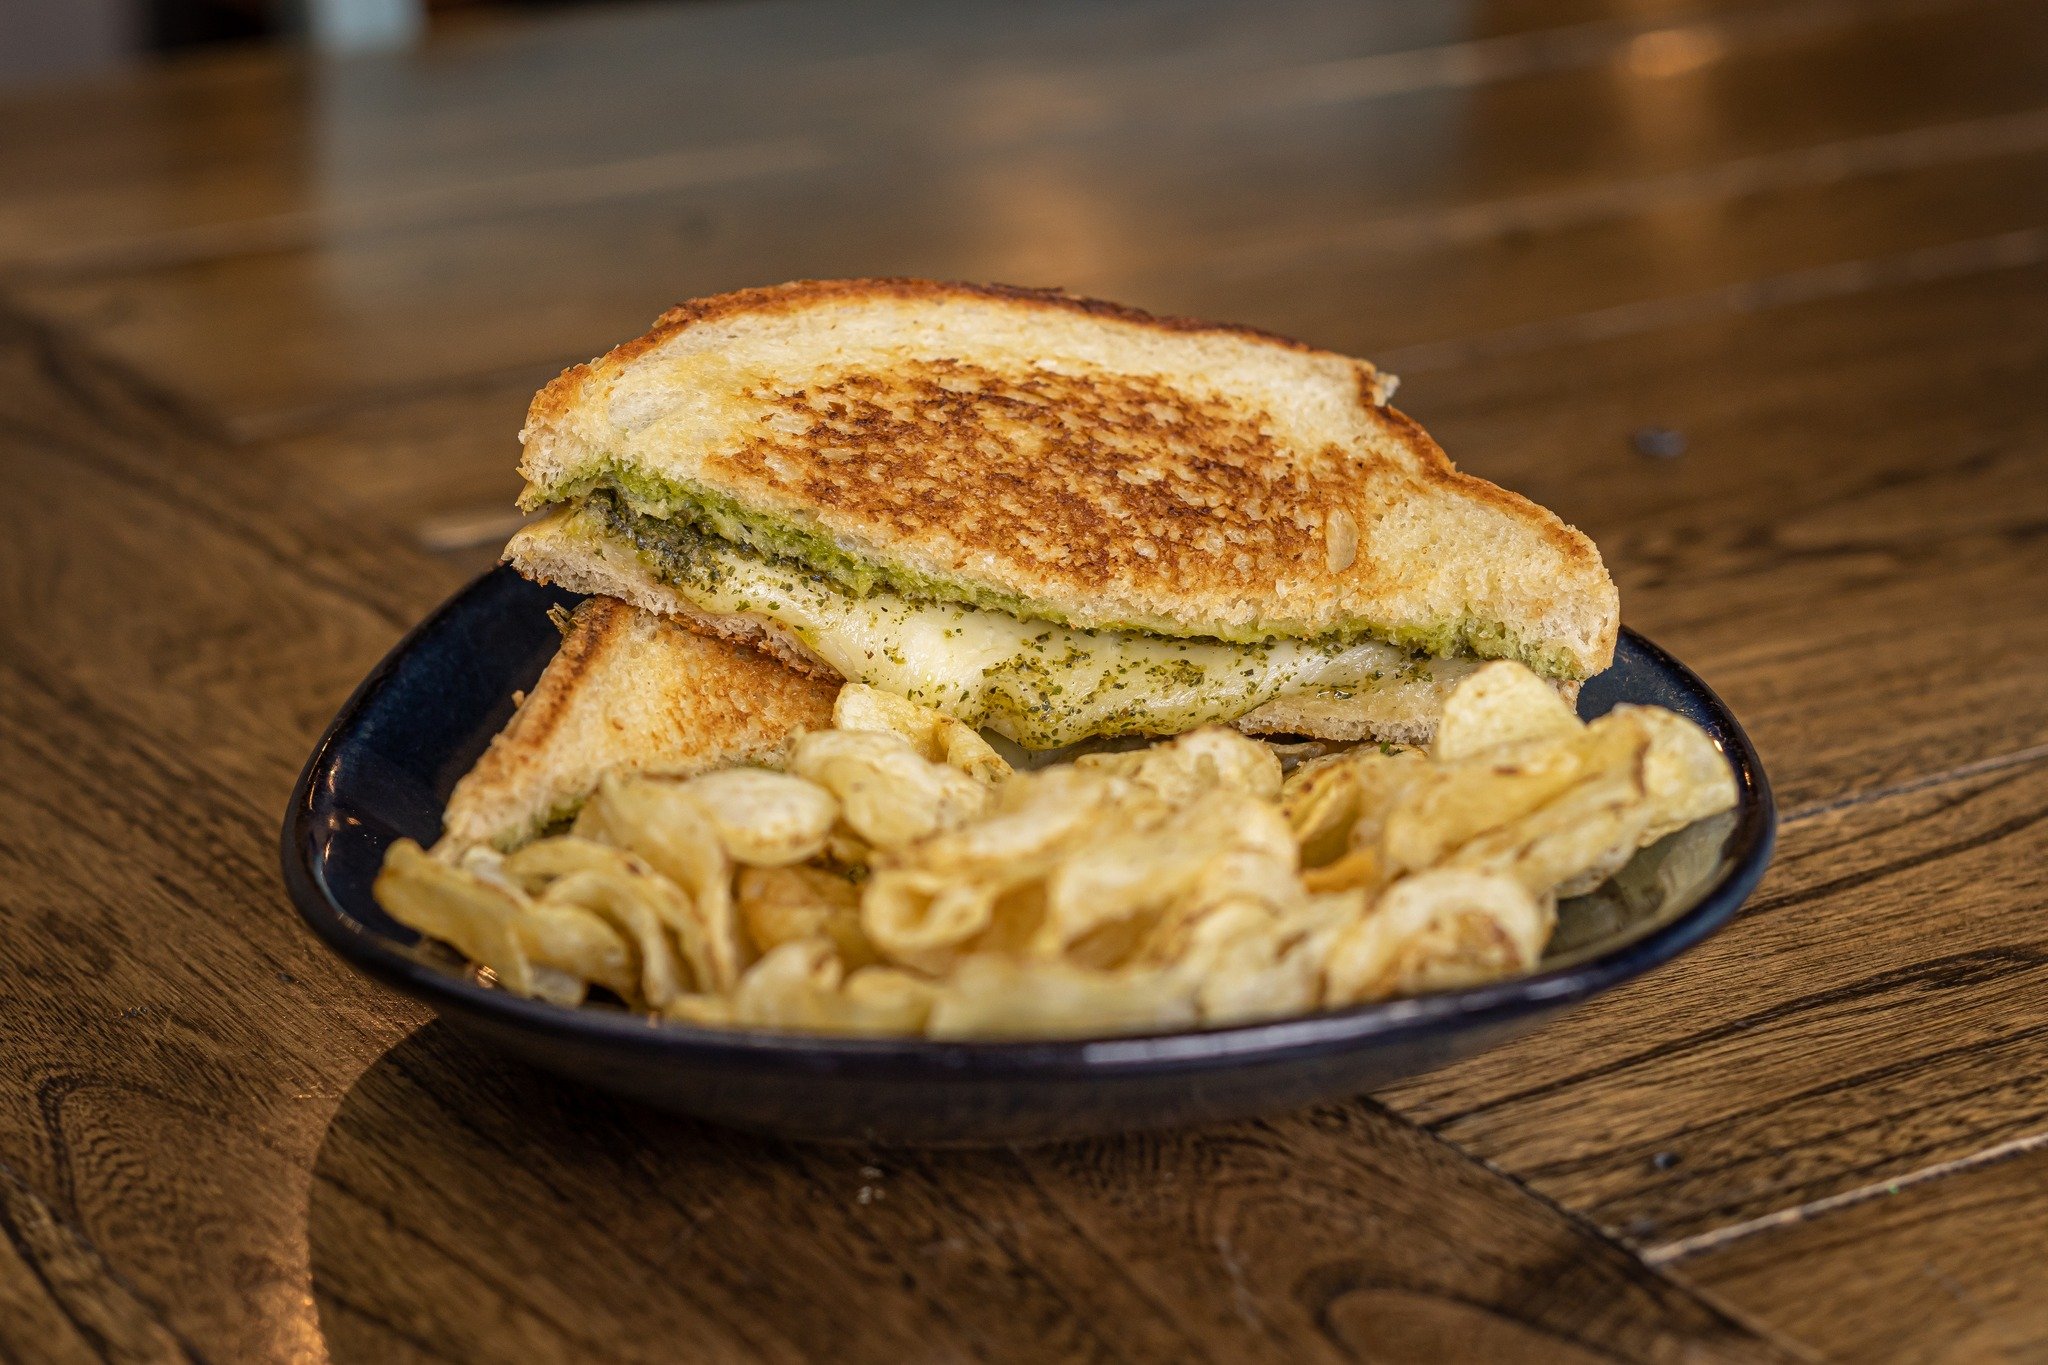 Sometimes you just want to stick to a classic when it comes time to eat. That's where our Pesto Grilled Cheese comes in!

This sandwich is a customer favorite. We take harvarti cheese and a pesto spread, bring them together between two pieces of sour